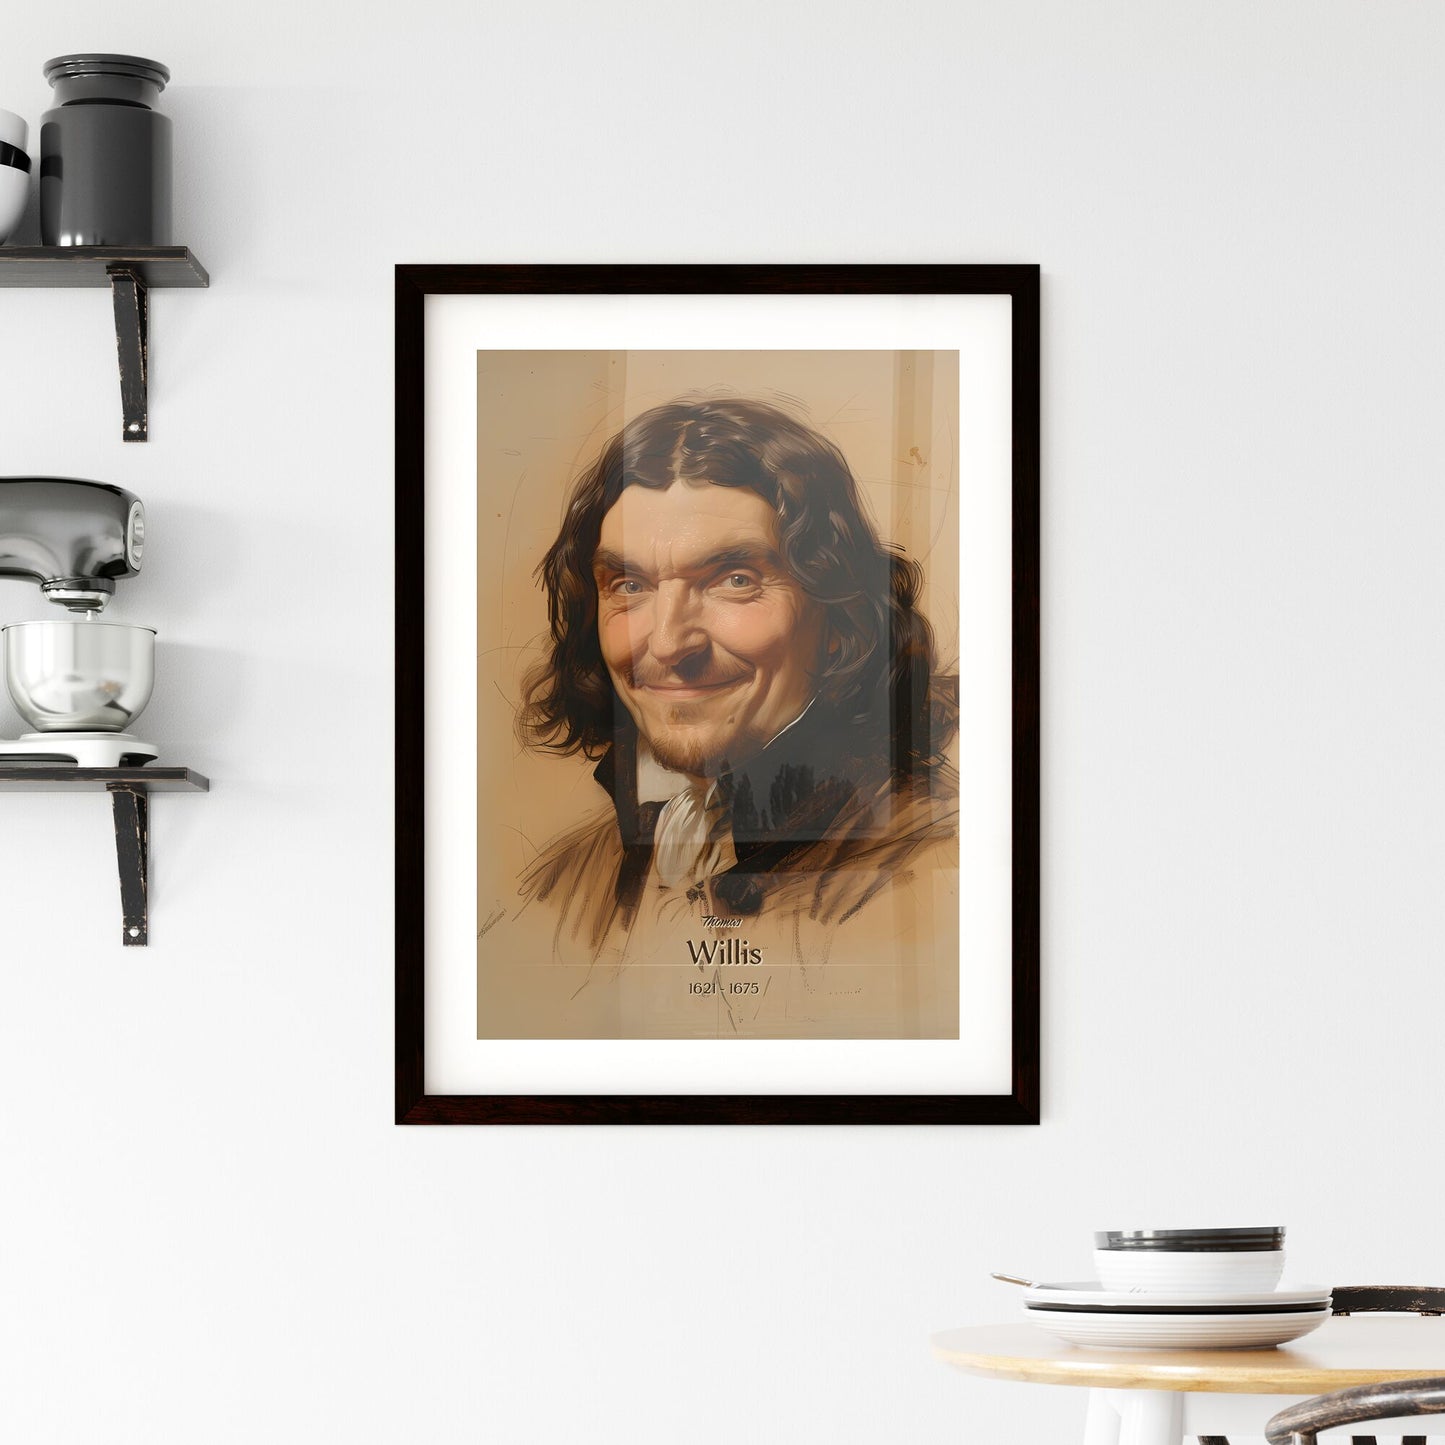 Thomas, Willis, 1621 - 1675, A Poster of a man with long hair smiling Default Title